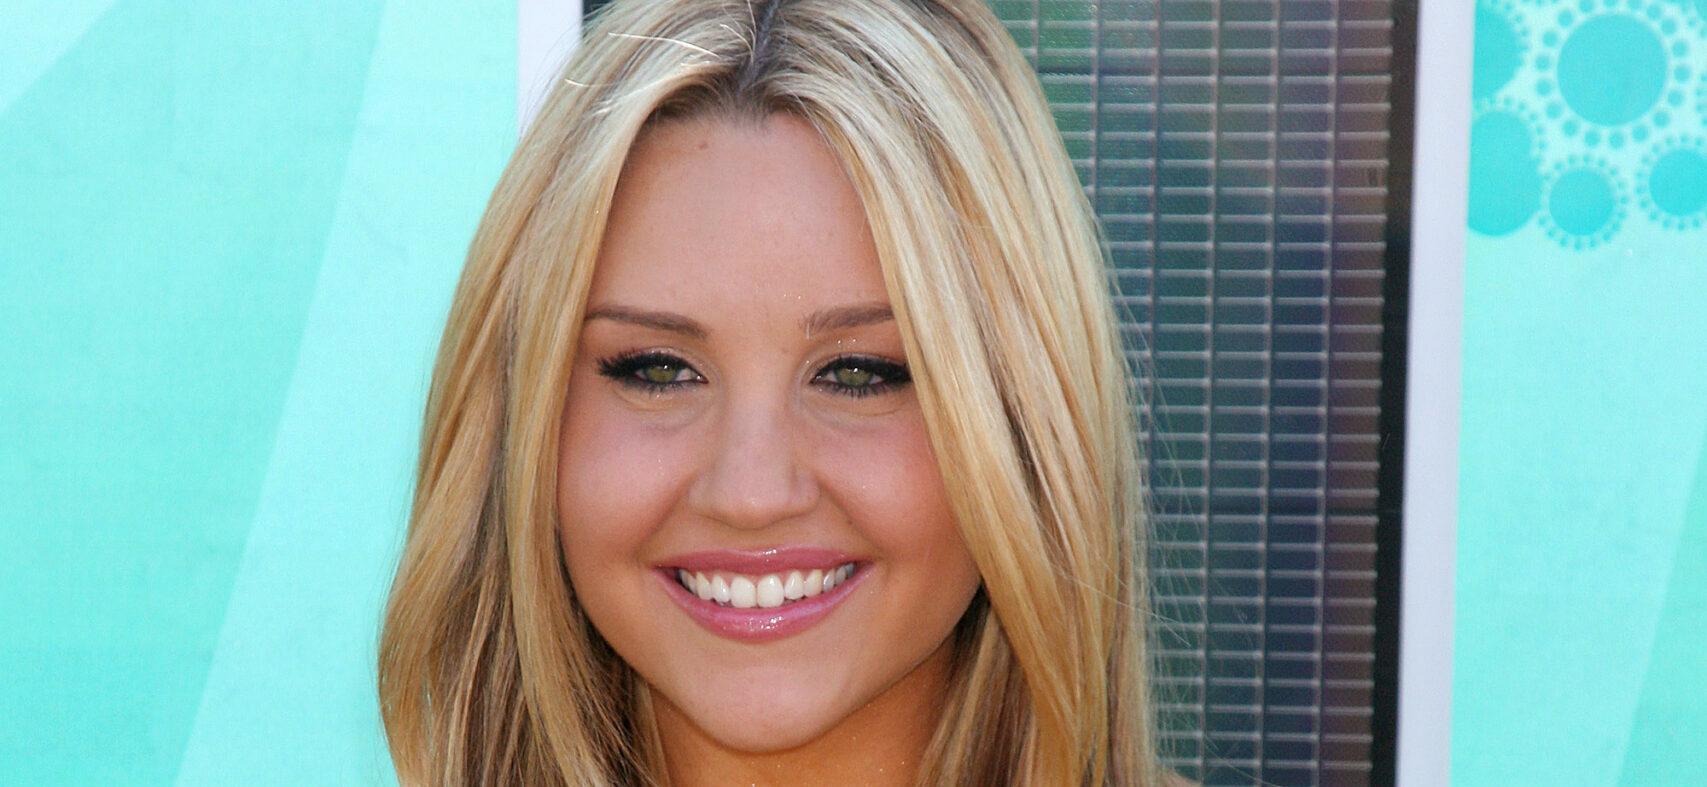 Amanda Bynes Moves To End Her Conservatorship After Almost A Decade